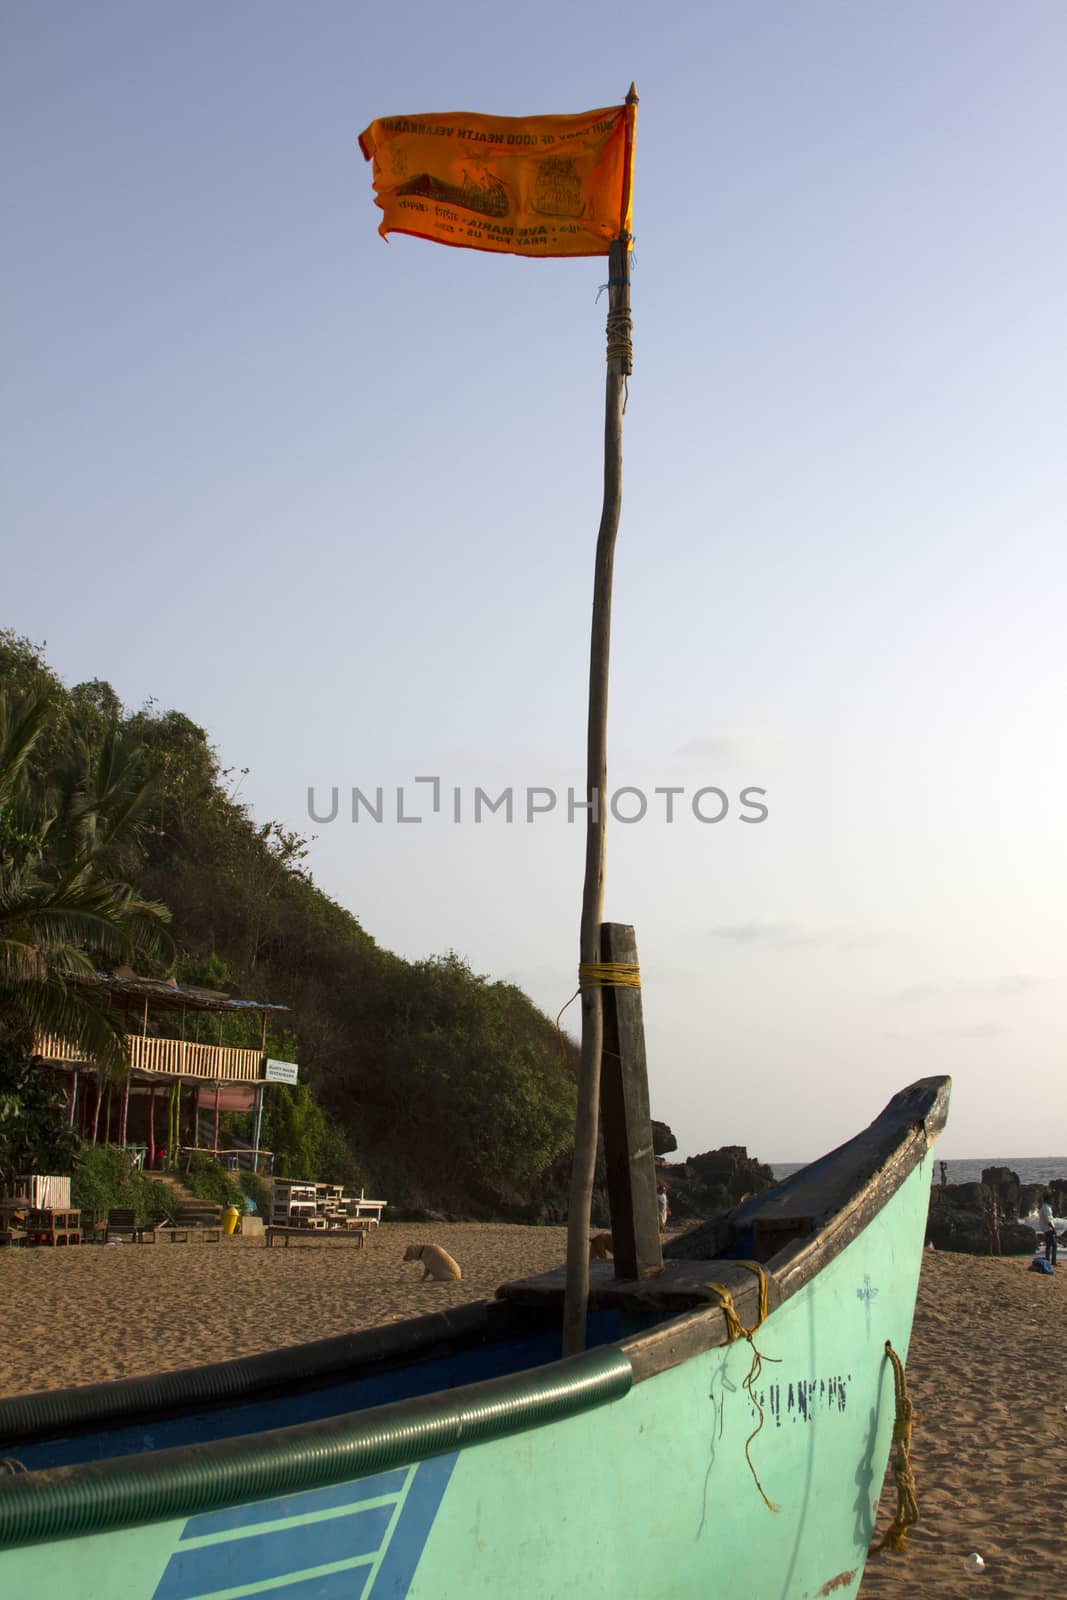 Old fishing boat standing on the sandy beach. India, Goa by mcherevan